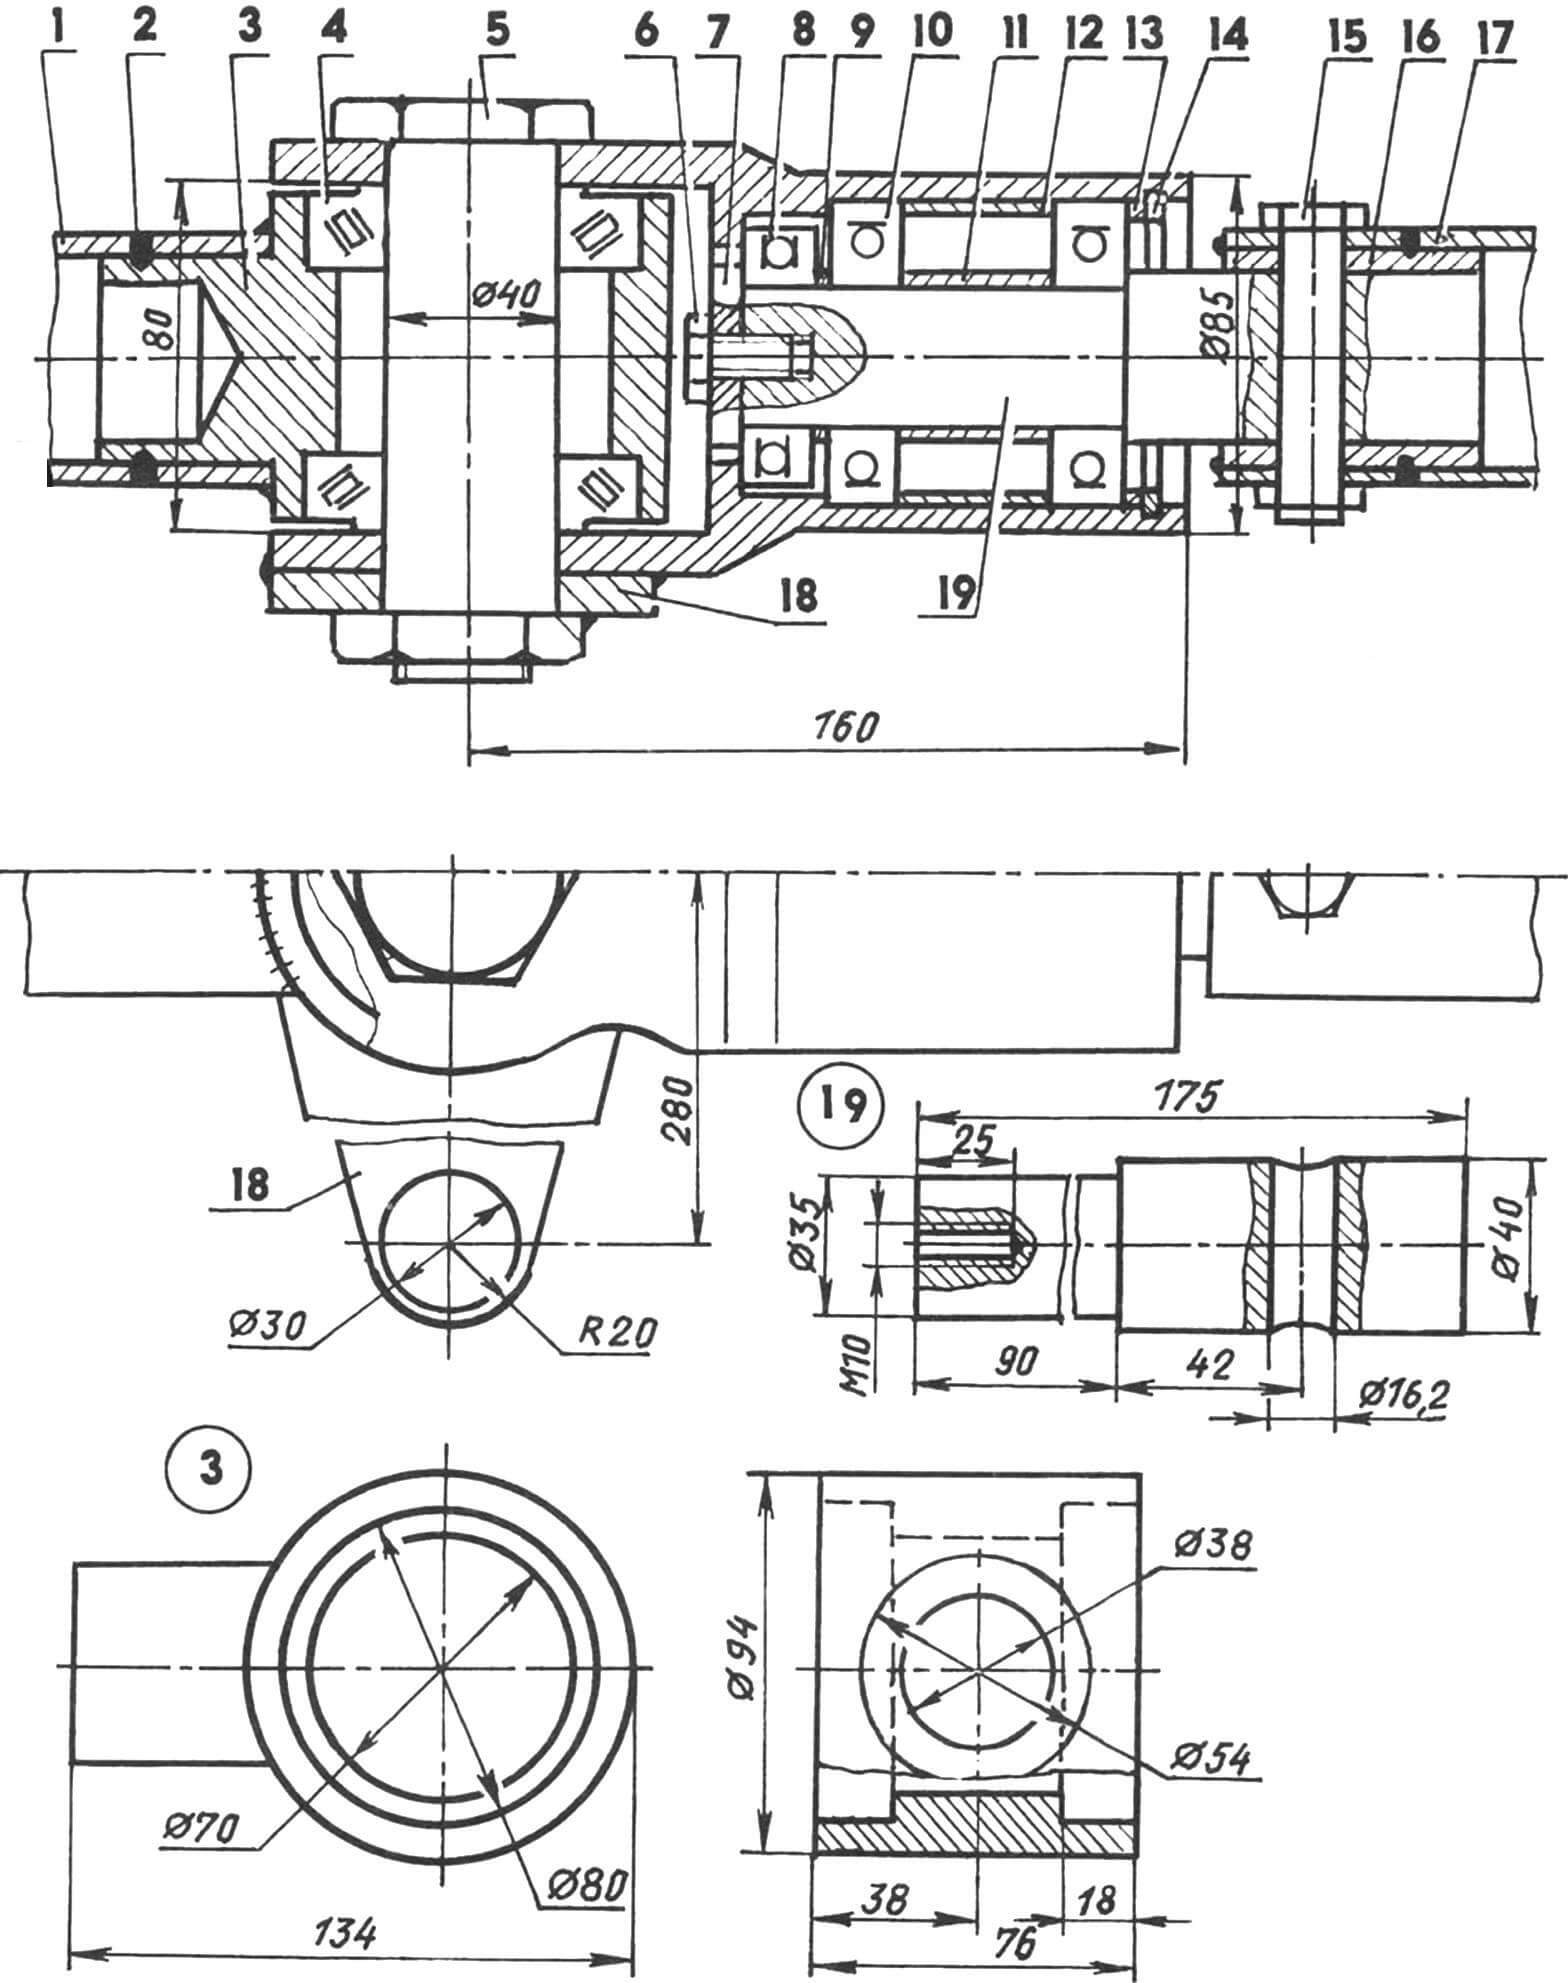 Docking and rotating unit of the front and rear semi-frames